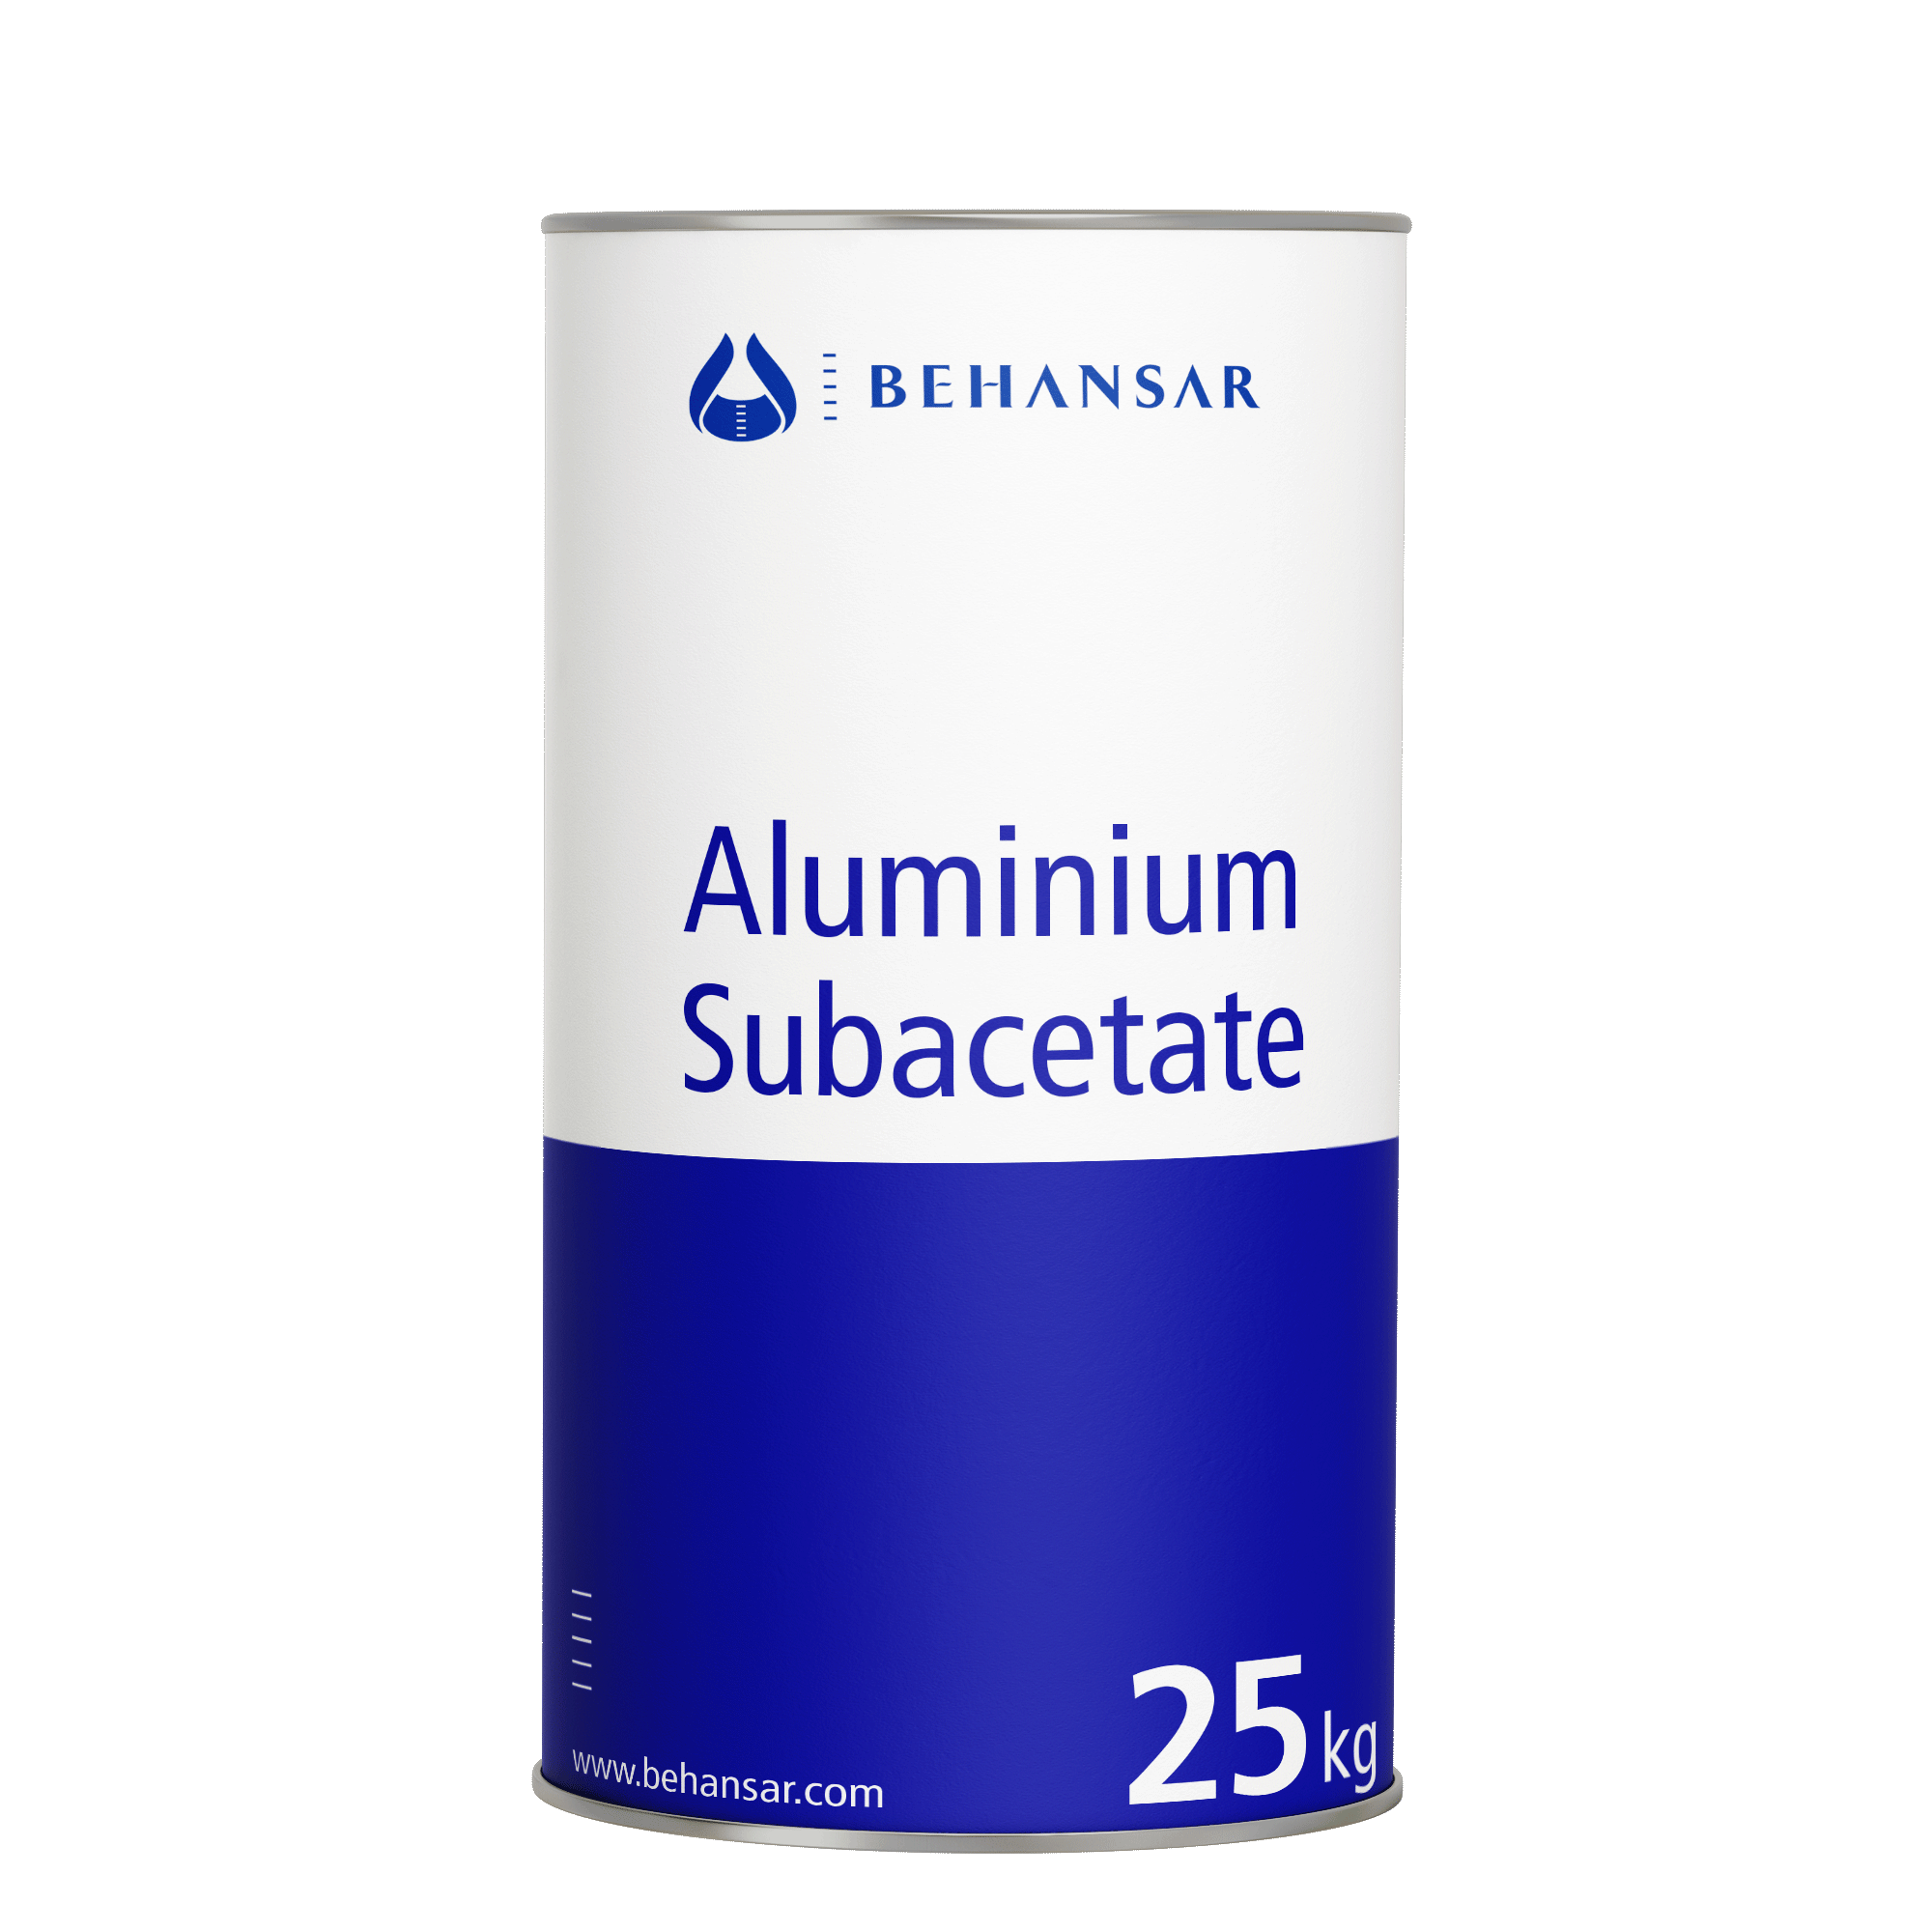 Aluminium Subacetate is one of the products of Behansar Co